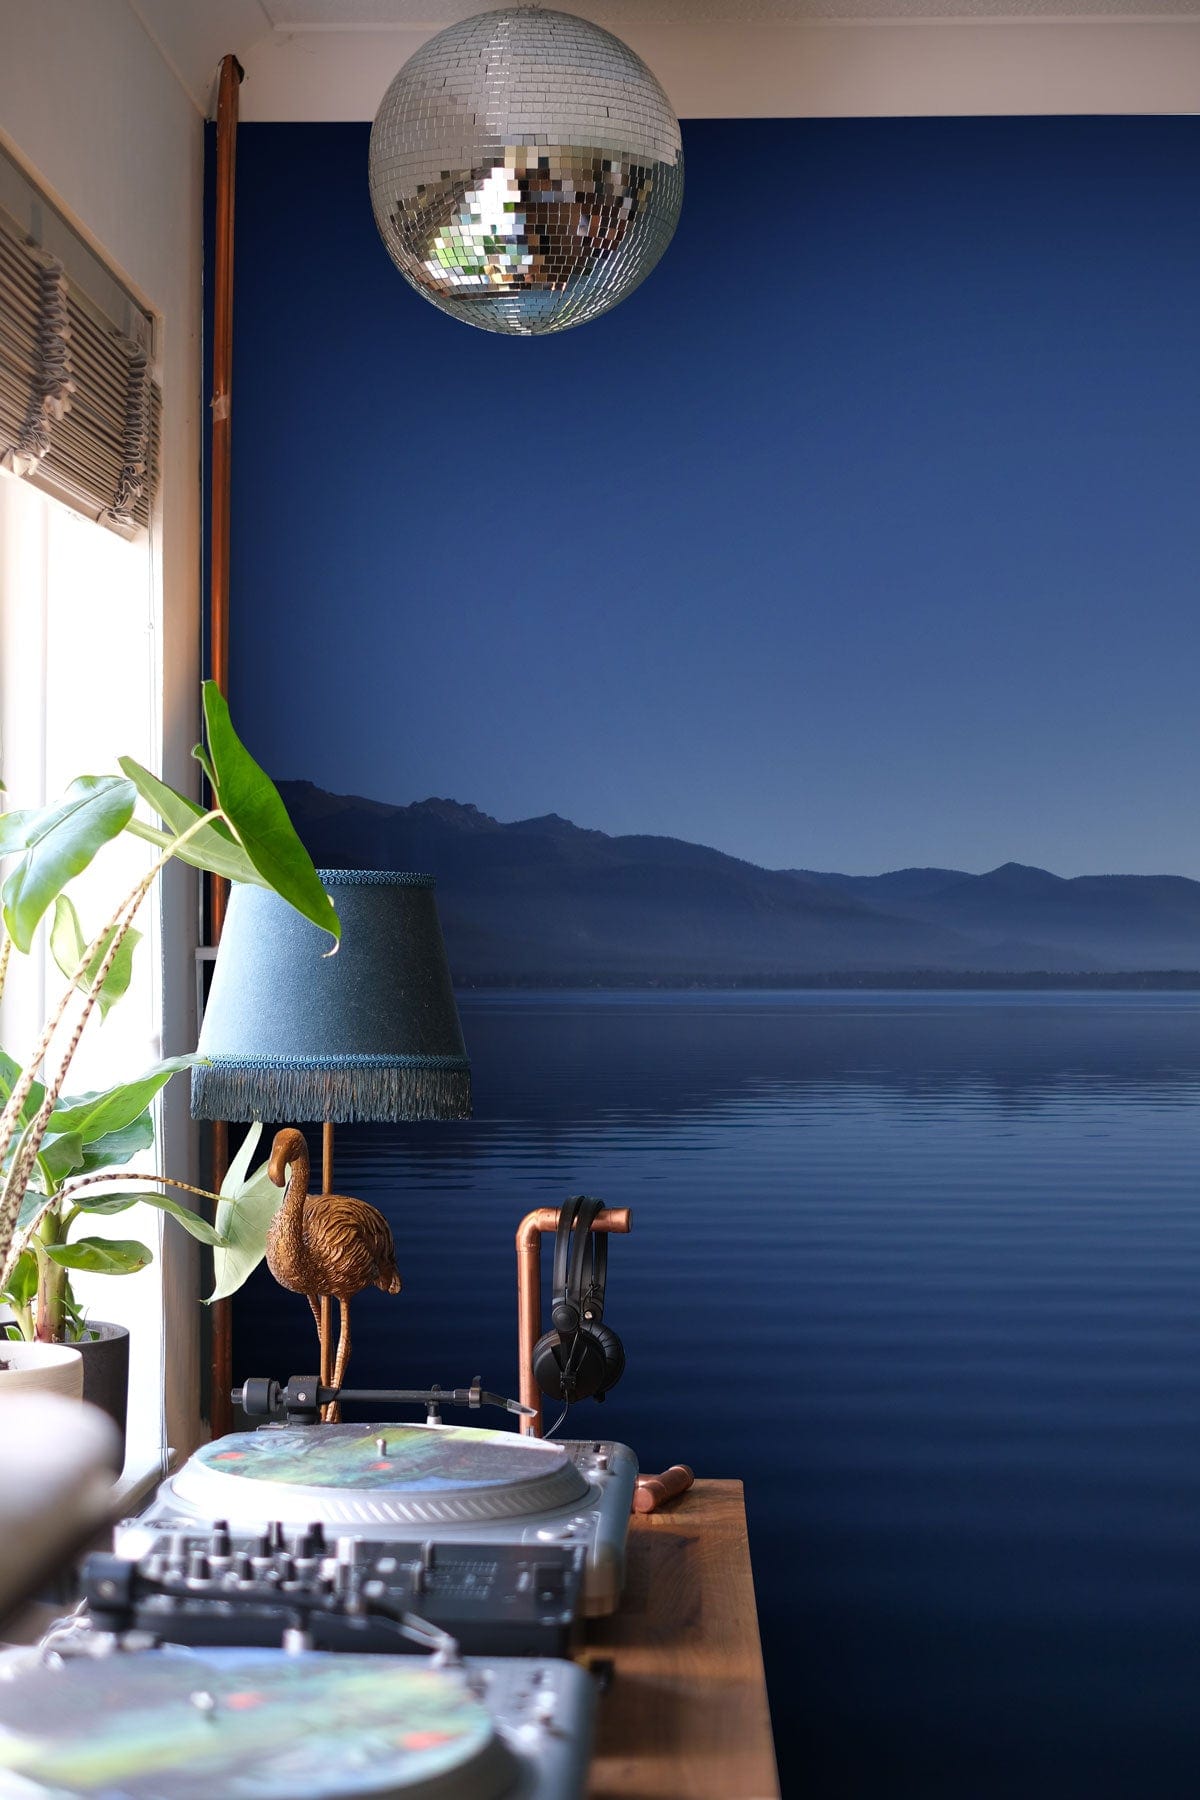 Wallpaper mural featuring tranquil lake scenery, ideal for use as a hallway decoration